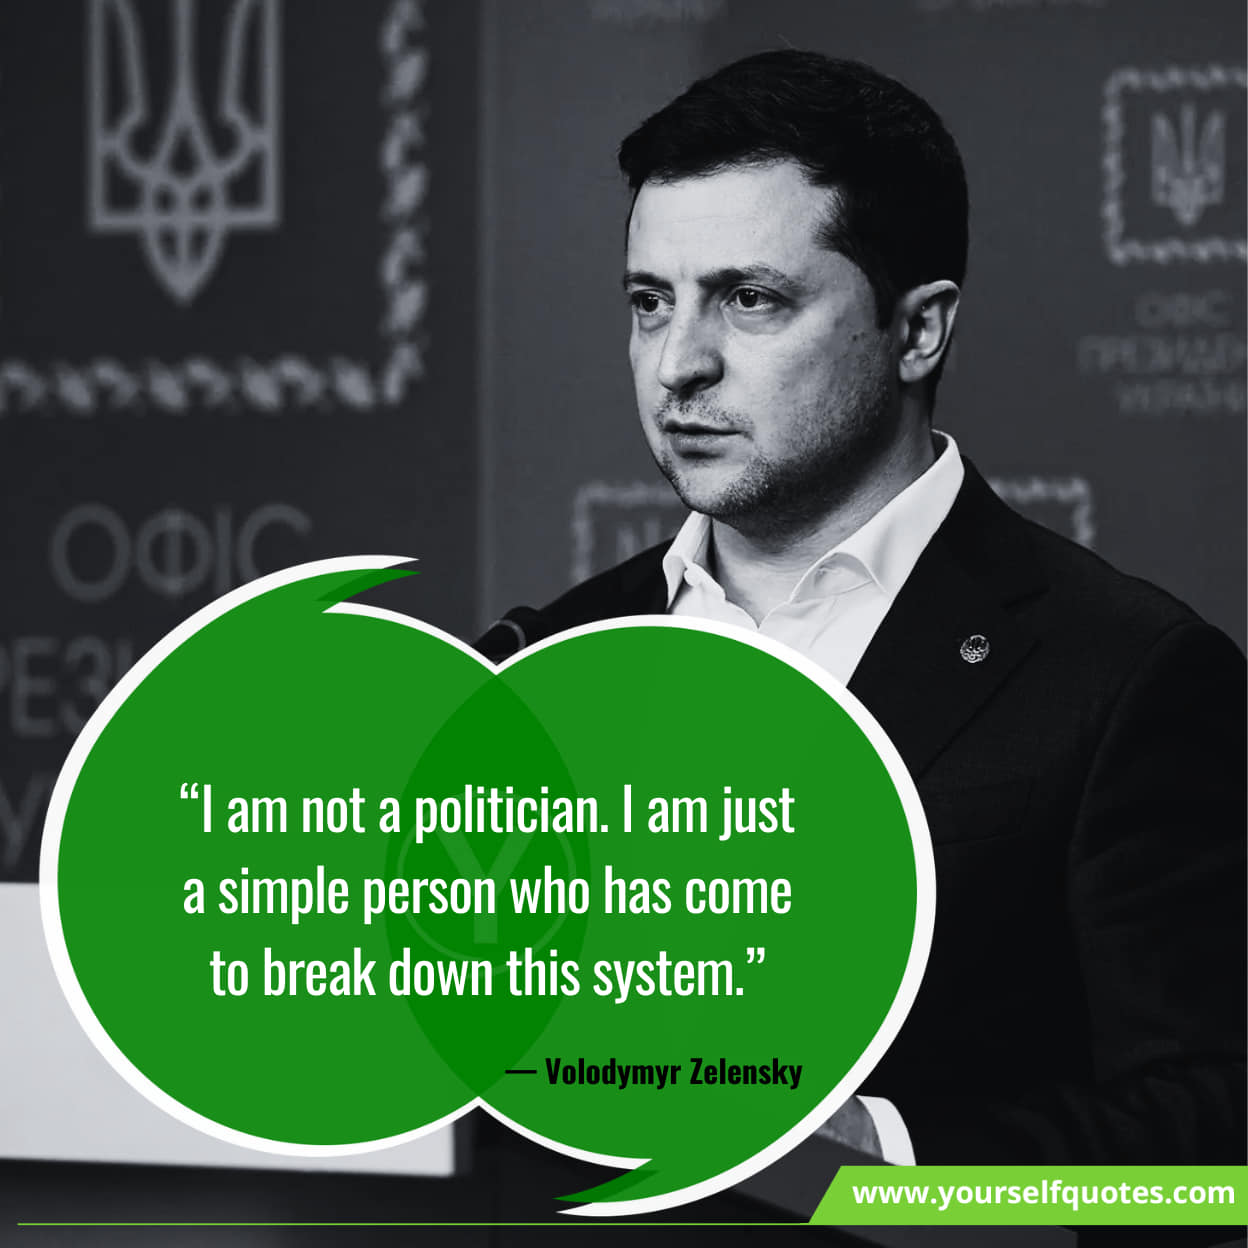 Latest Quotes By Volodymyr Zelensky 